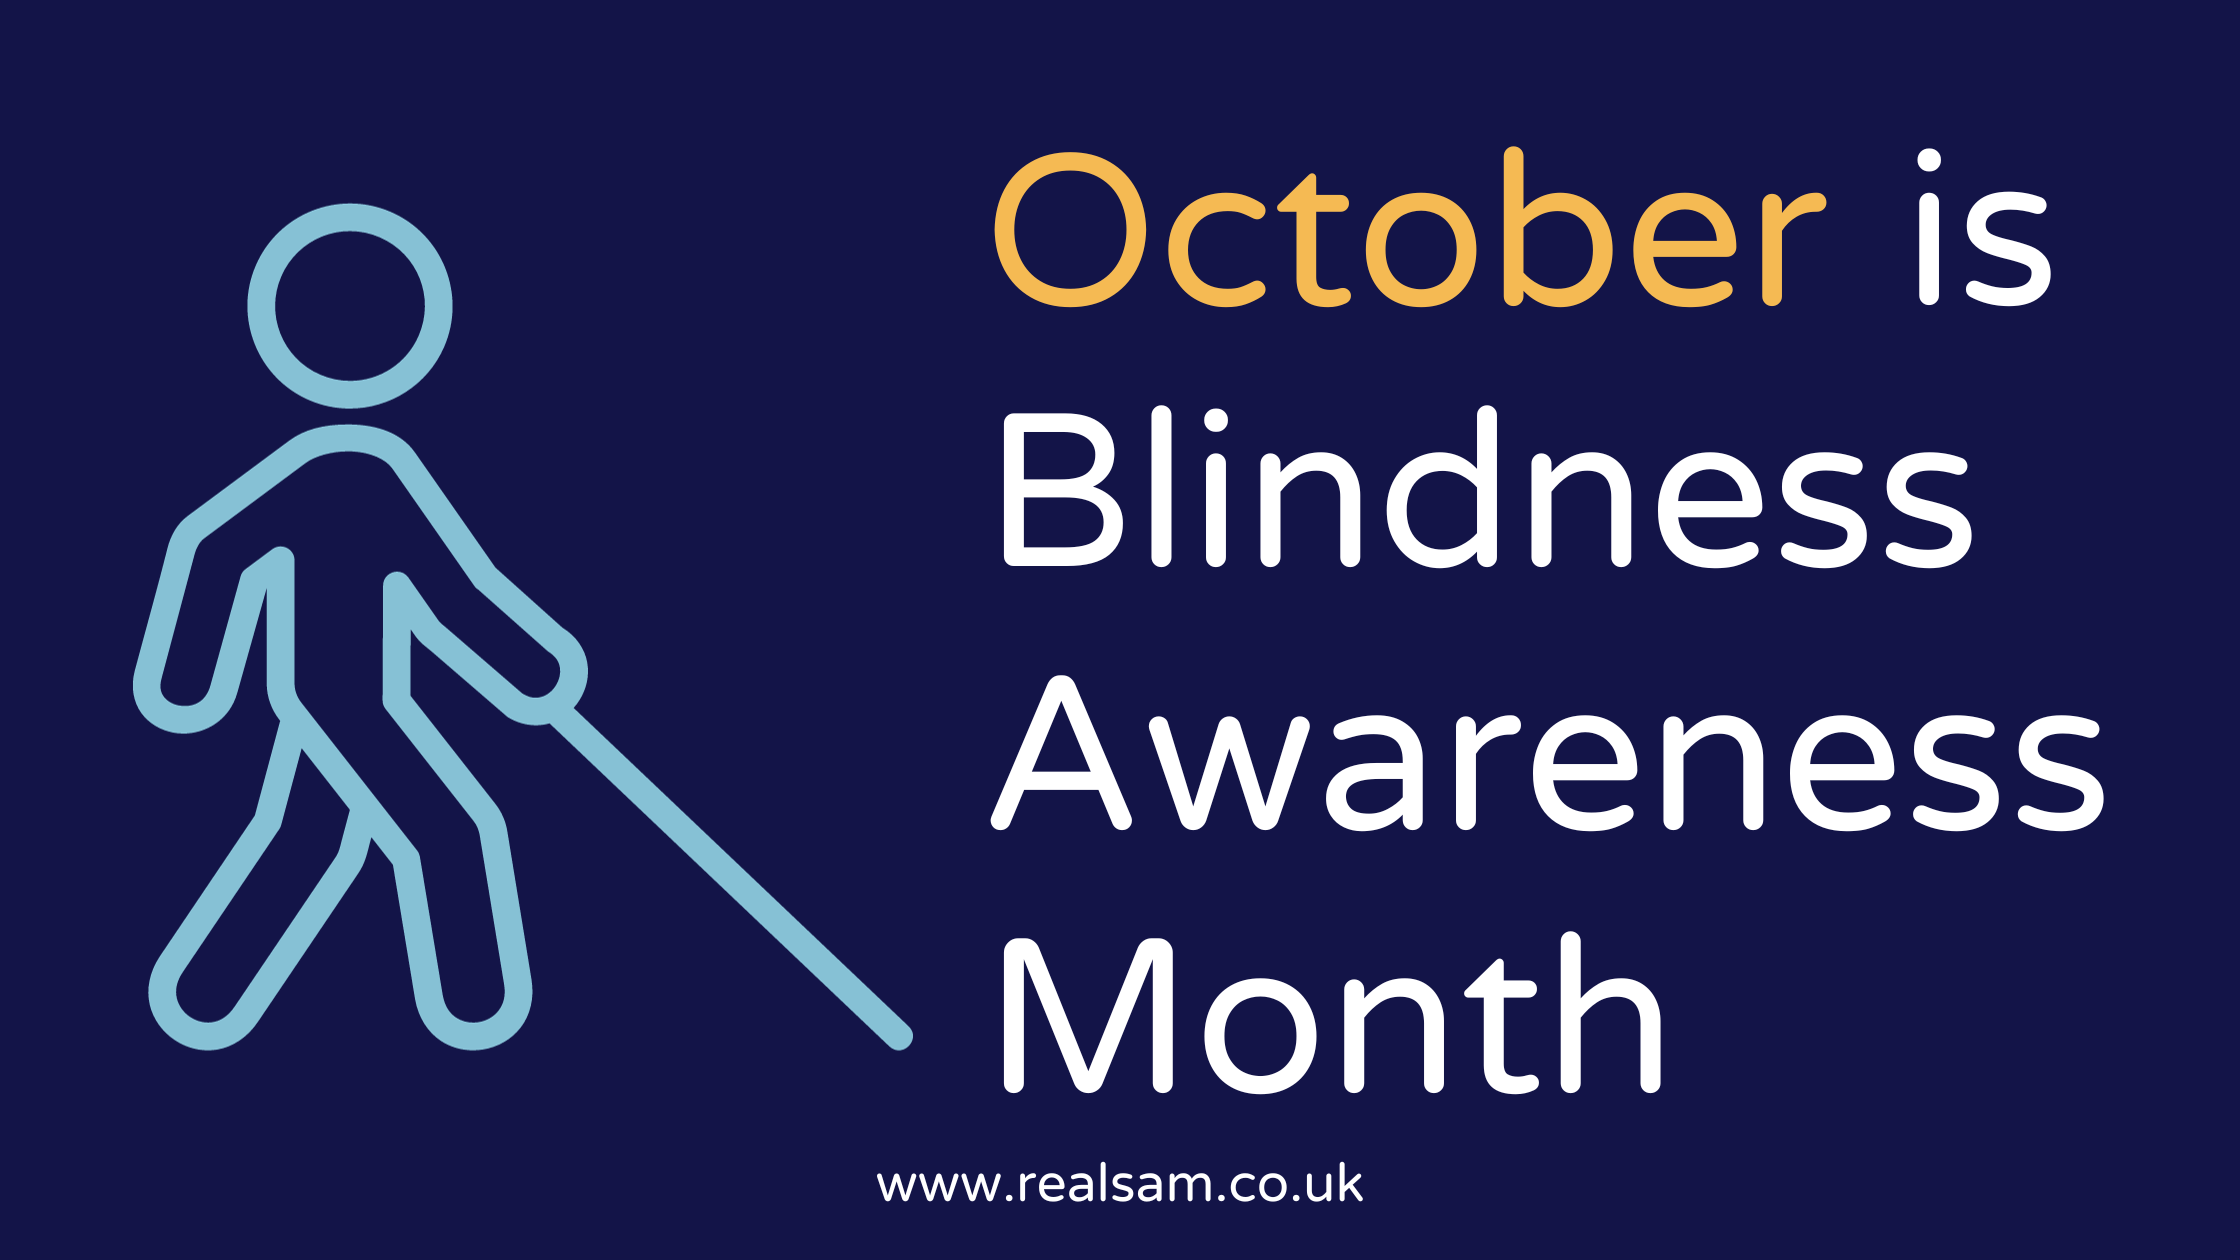 October is Blindness Awareness Month